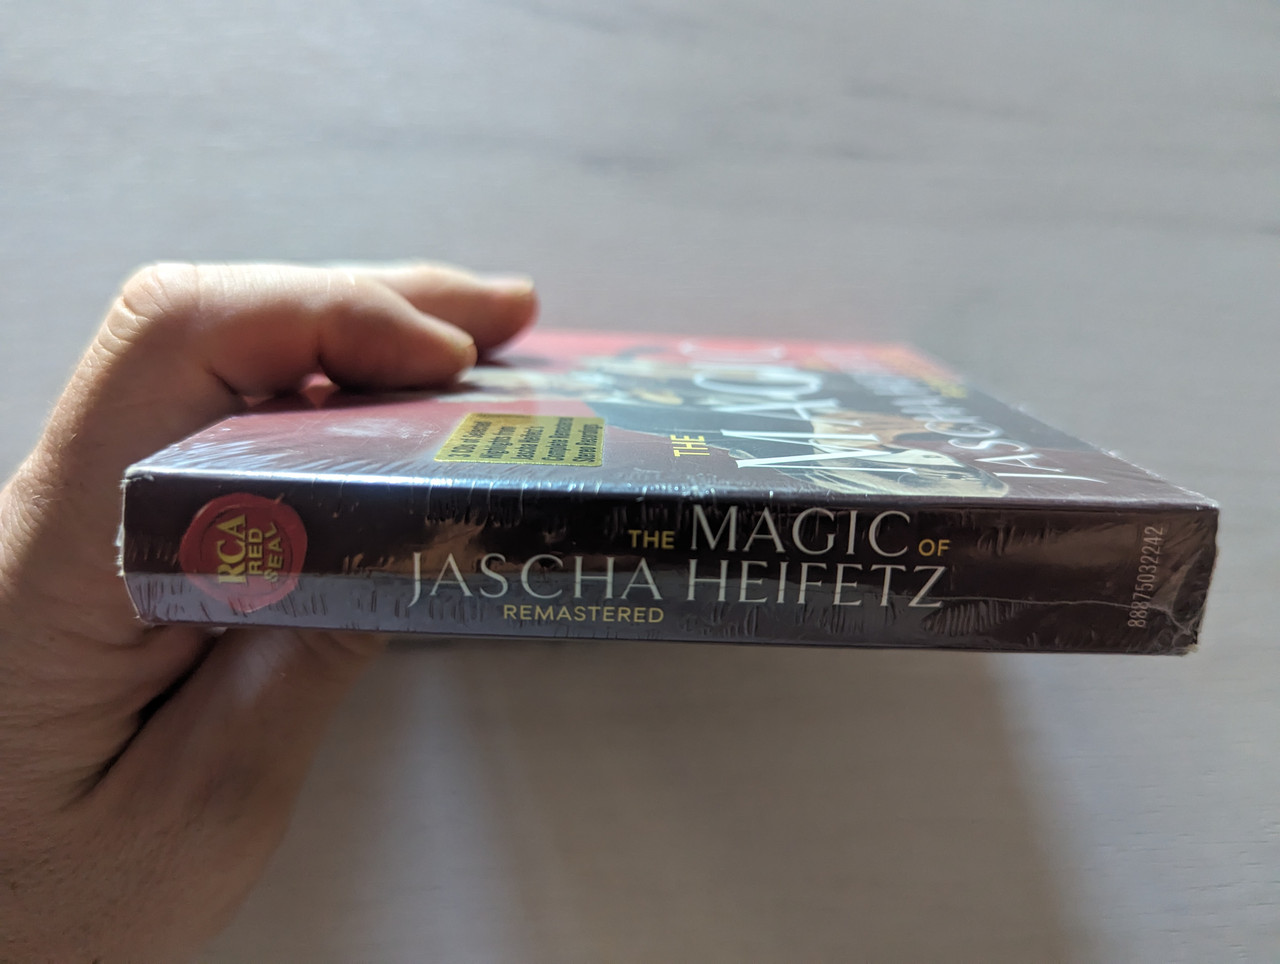 https://cdn10.bigcommerce.com/s-62bdpkt7pb/products/0/images/314146/The_Magic_of_Jascha_Heifetz_-_Remastered_3_CDs_of_Selected_Highlights_from_Jascha_Heifetzs_Complete_Remastered_Stereo_Recordings_RCA_Red_Seal_3x_Audio_CD_2016_88875032242_3__97405.1701324222.1280.1280.jpg?c=2